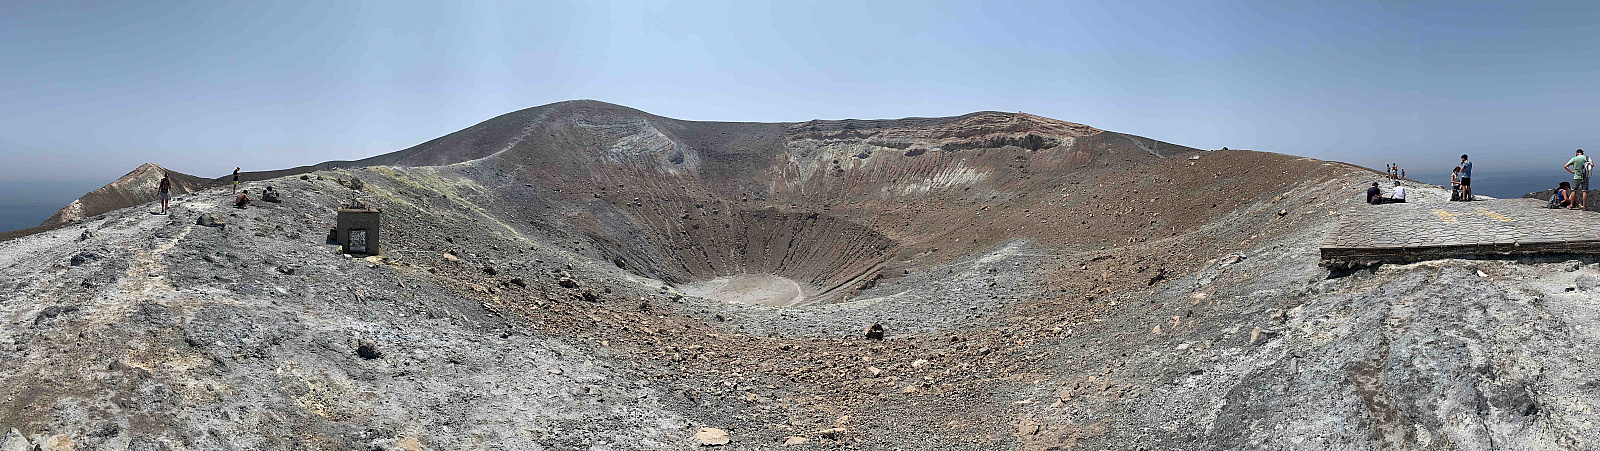 The crater of La Fossa cone, at Vulcano island (Aeolian Archipelago, South Mediterranean), which originated the most recent (1888-90) eruption of this volcano. It hosts one of the stations of the TROPOMAG network, aimed to measure possible anomalies caused by Geomagnetically Induced Currents (GICs) in probes electrically coupled with the soil. This station is equipped with a capacitive probe measuring the volumetric soil moisture content and a temperature sensor. - Pictures